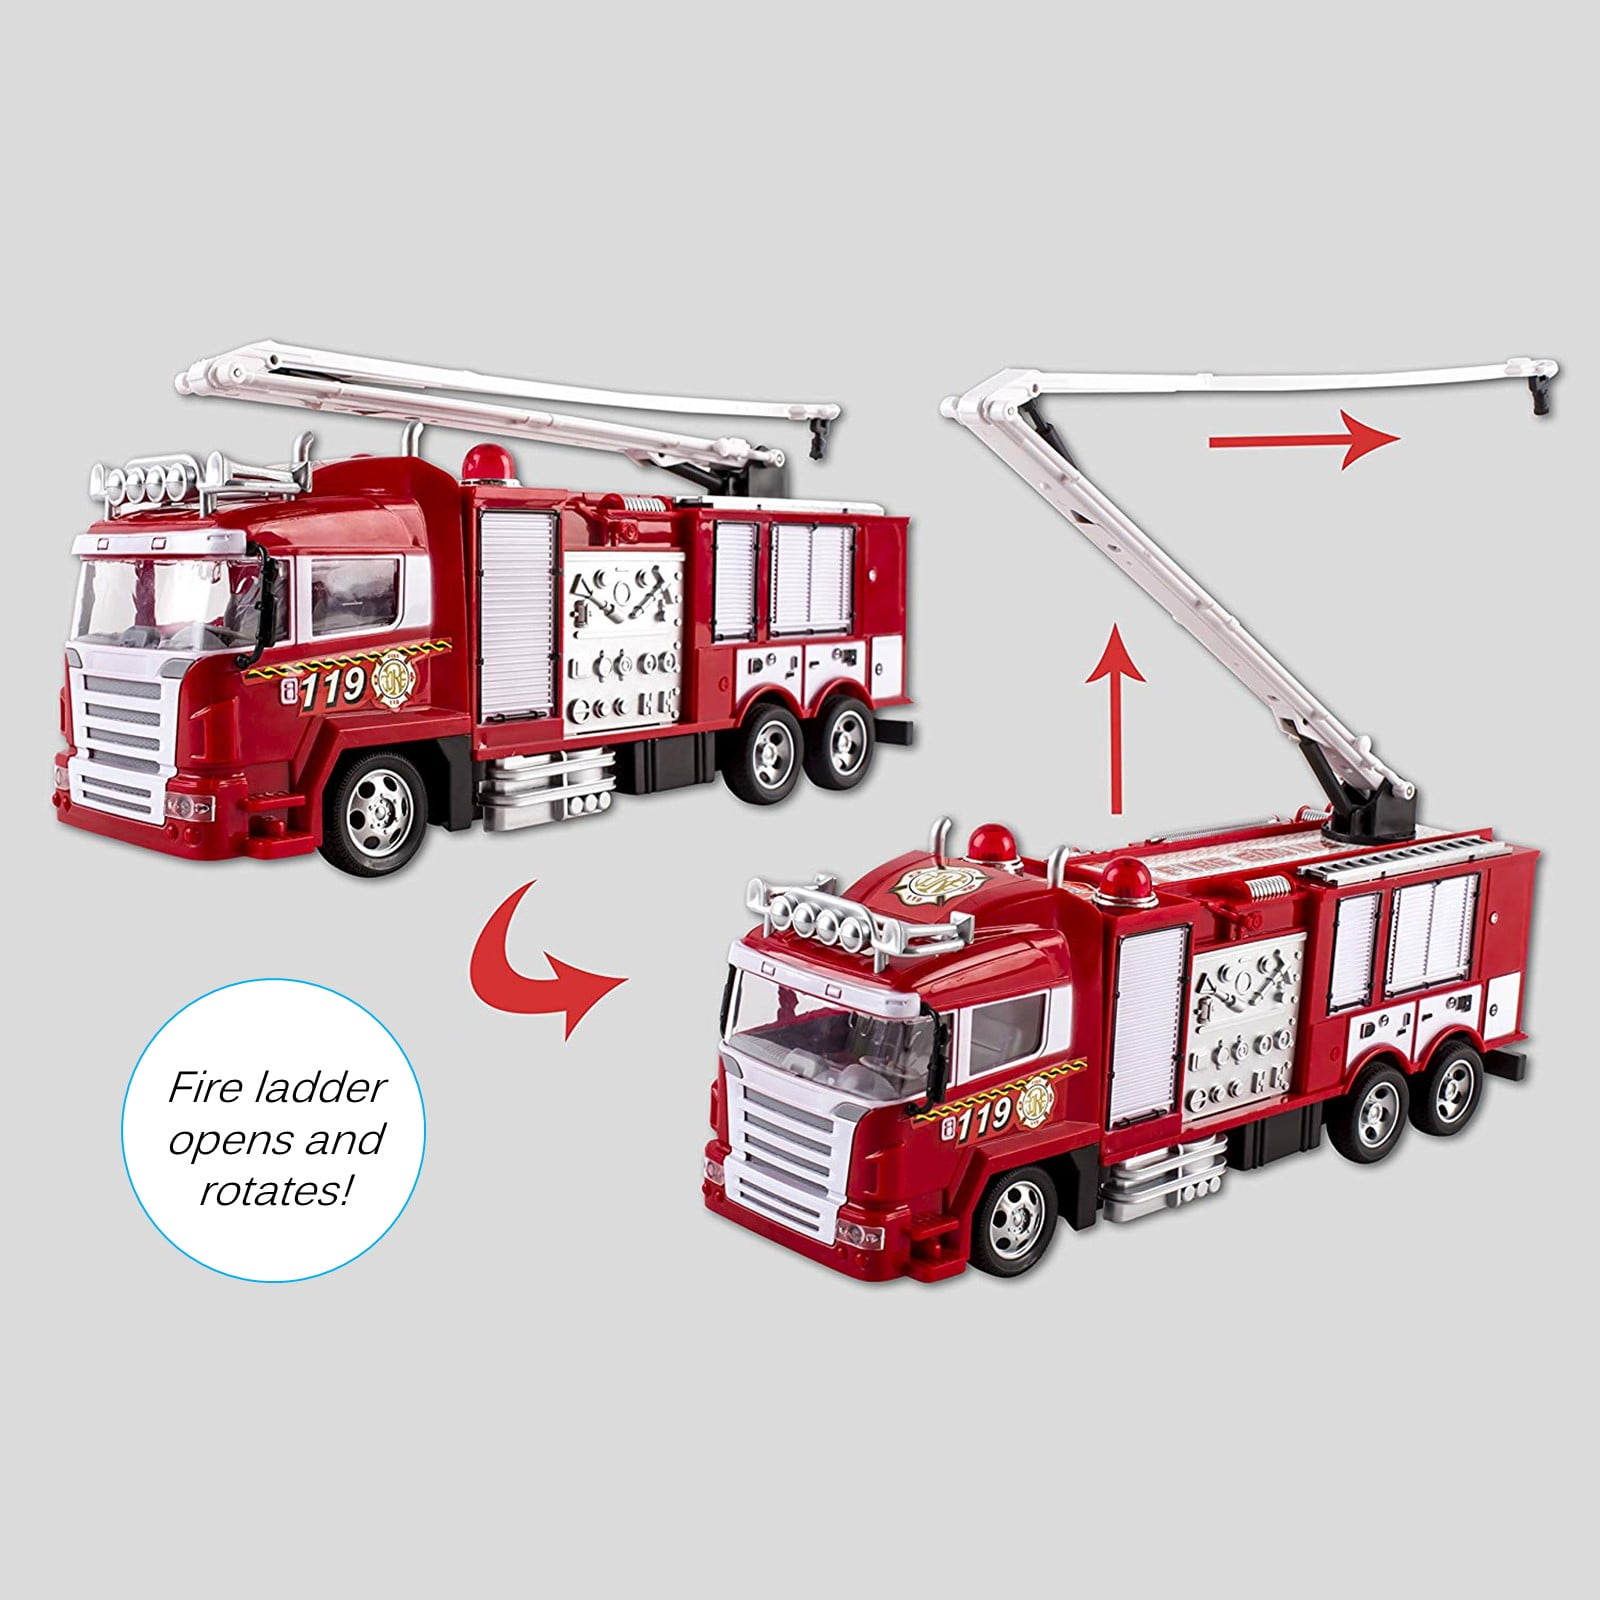 FIRE RESCUE FIRE ENGINE TRUCK Extendable ladder Radio Remote Control Car 22CM 